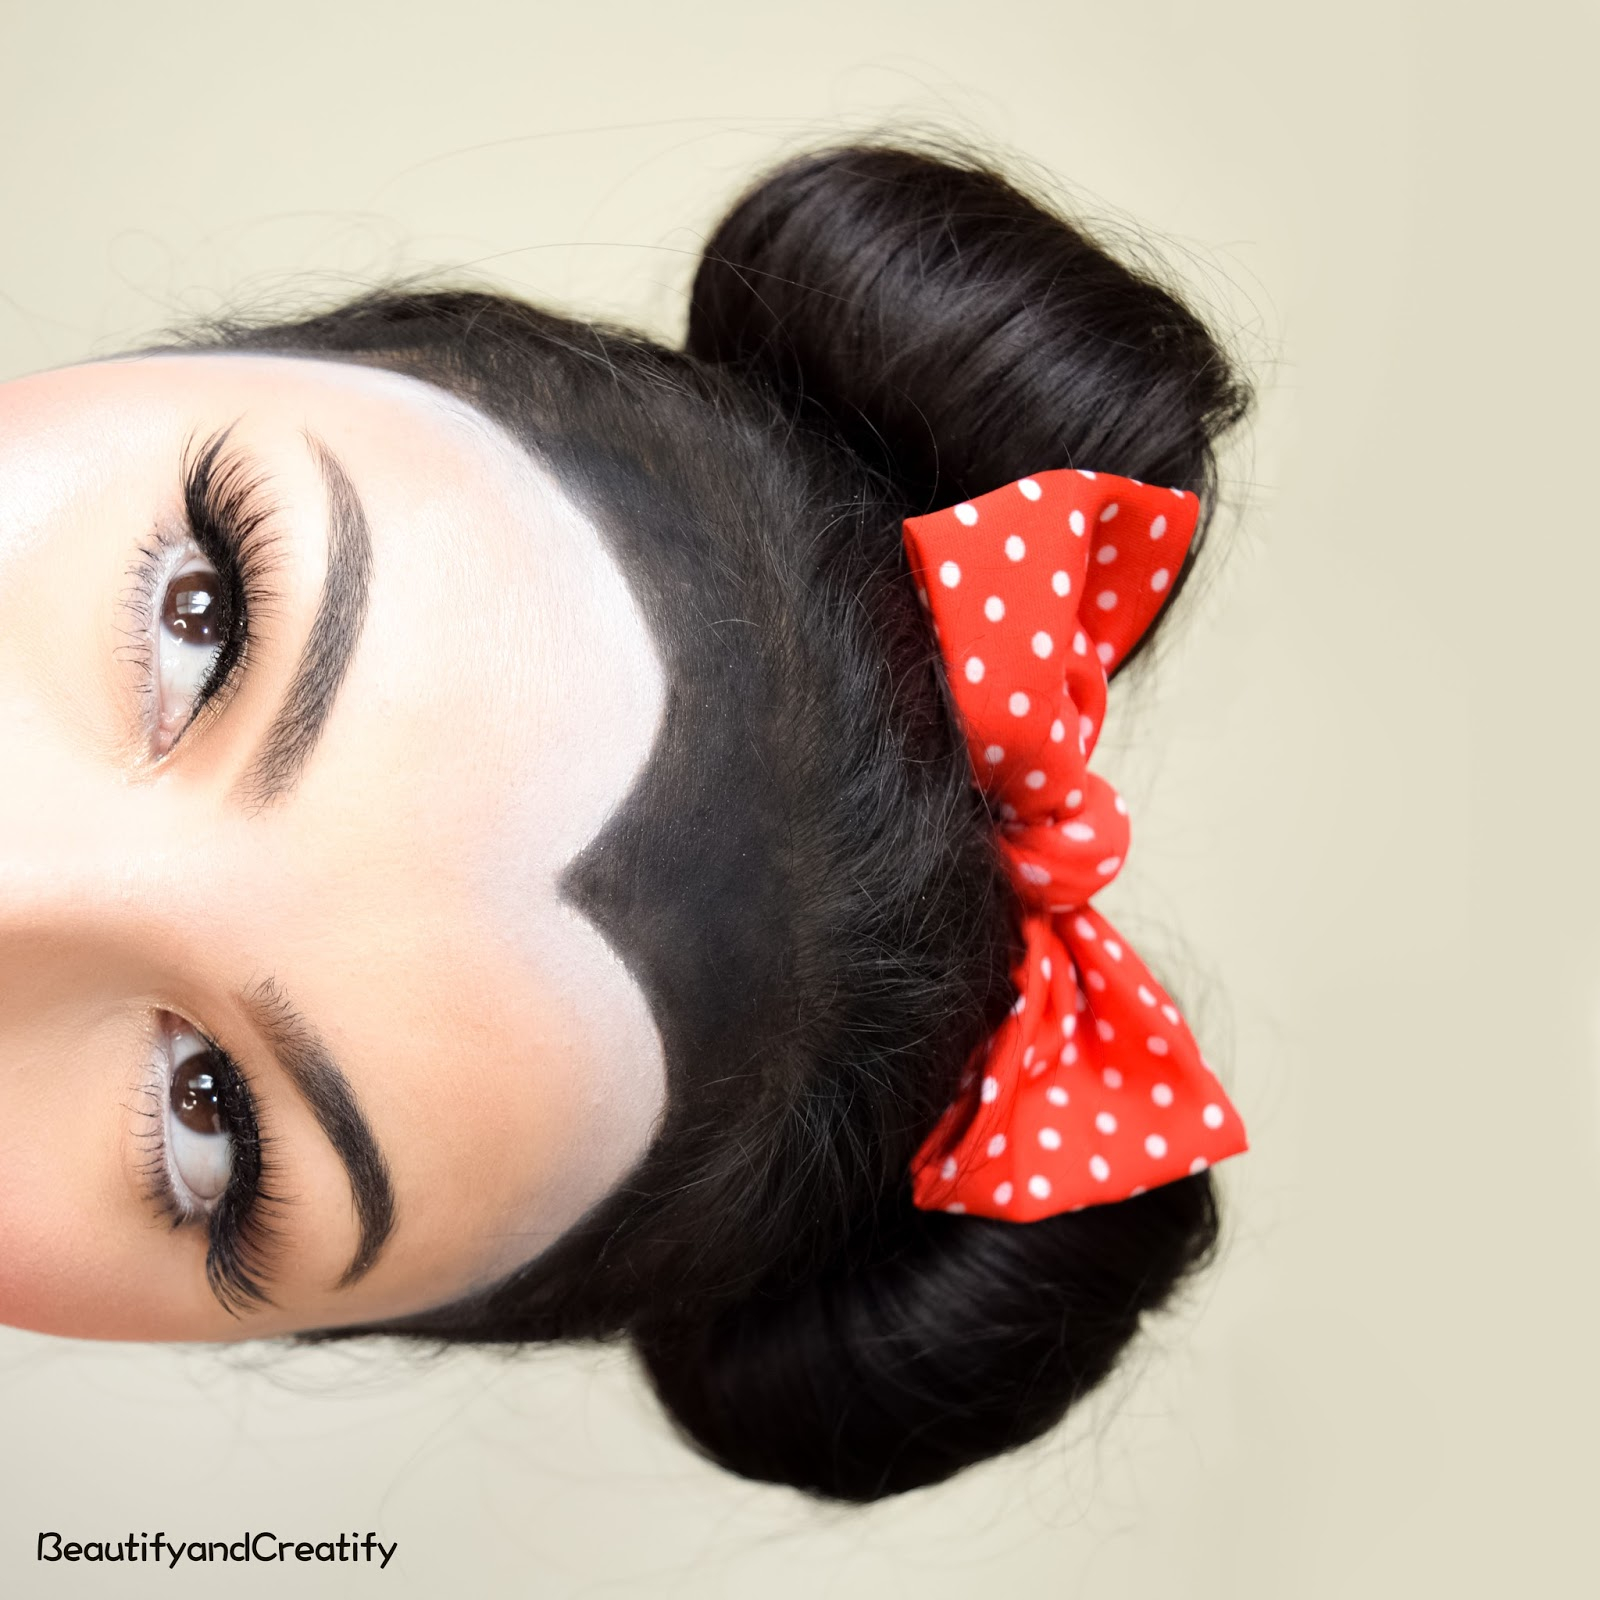 Minnie Mouse Eye Makeup Minnie Mouse Makeup And Hair Tutorial Easy Halloween Costume